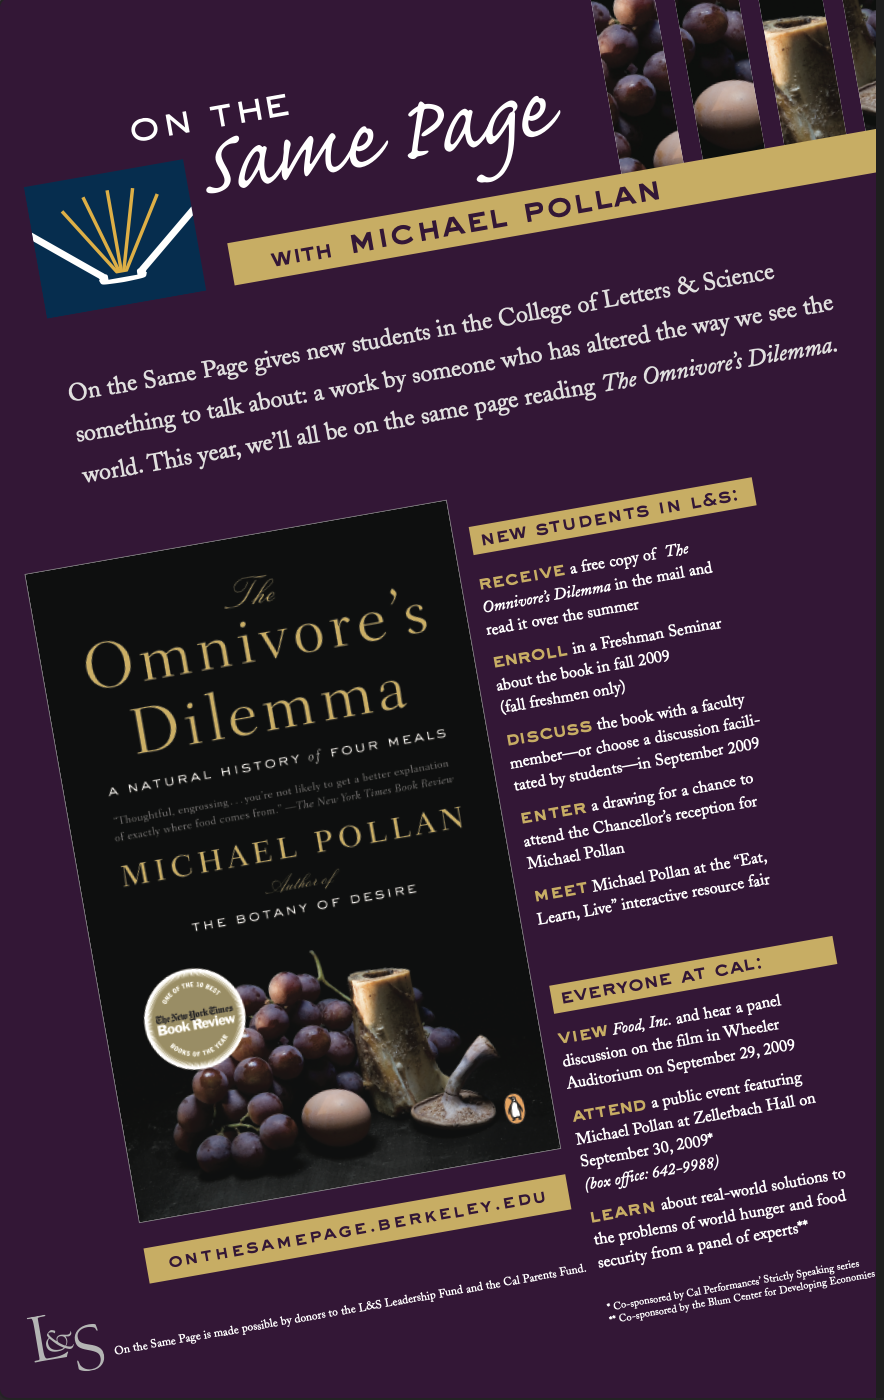 The Omnivore's Dilemma Fall 2009 poster